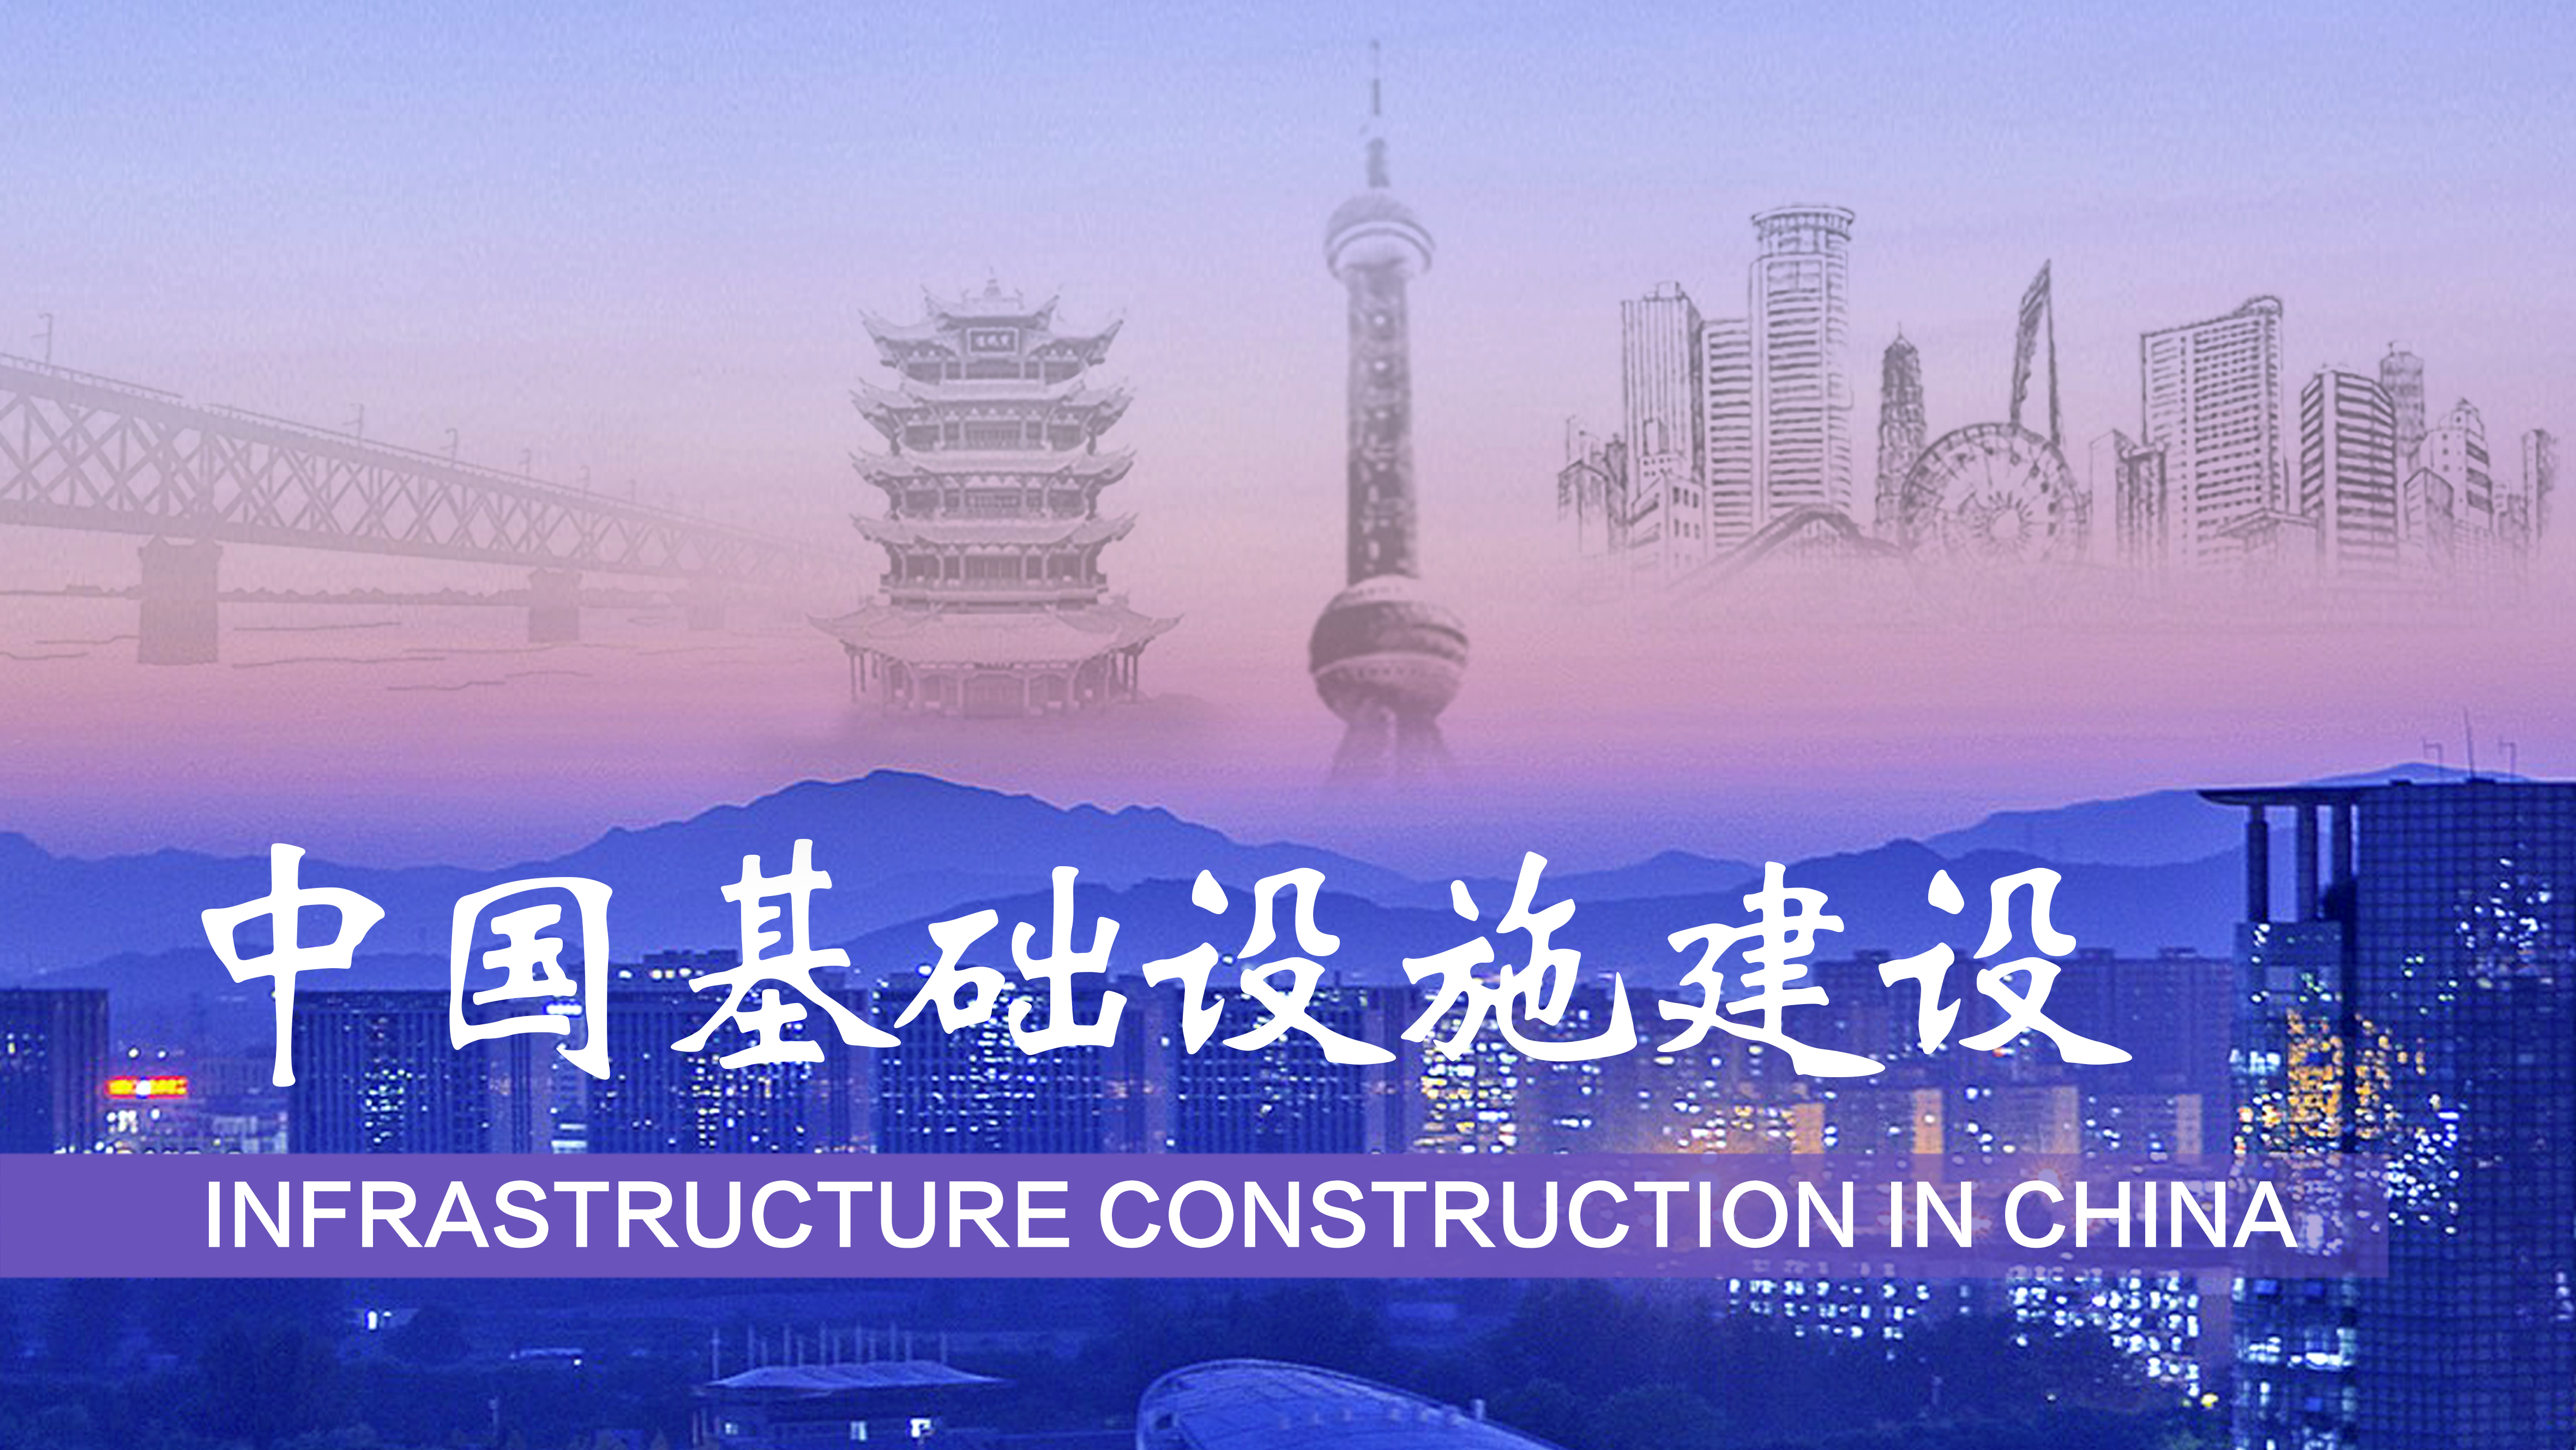 Forty Years of Infrastructure Construction in China